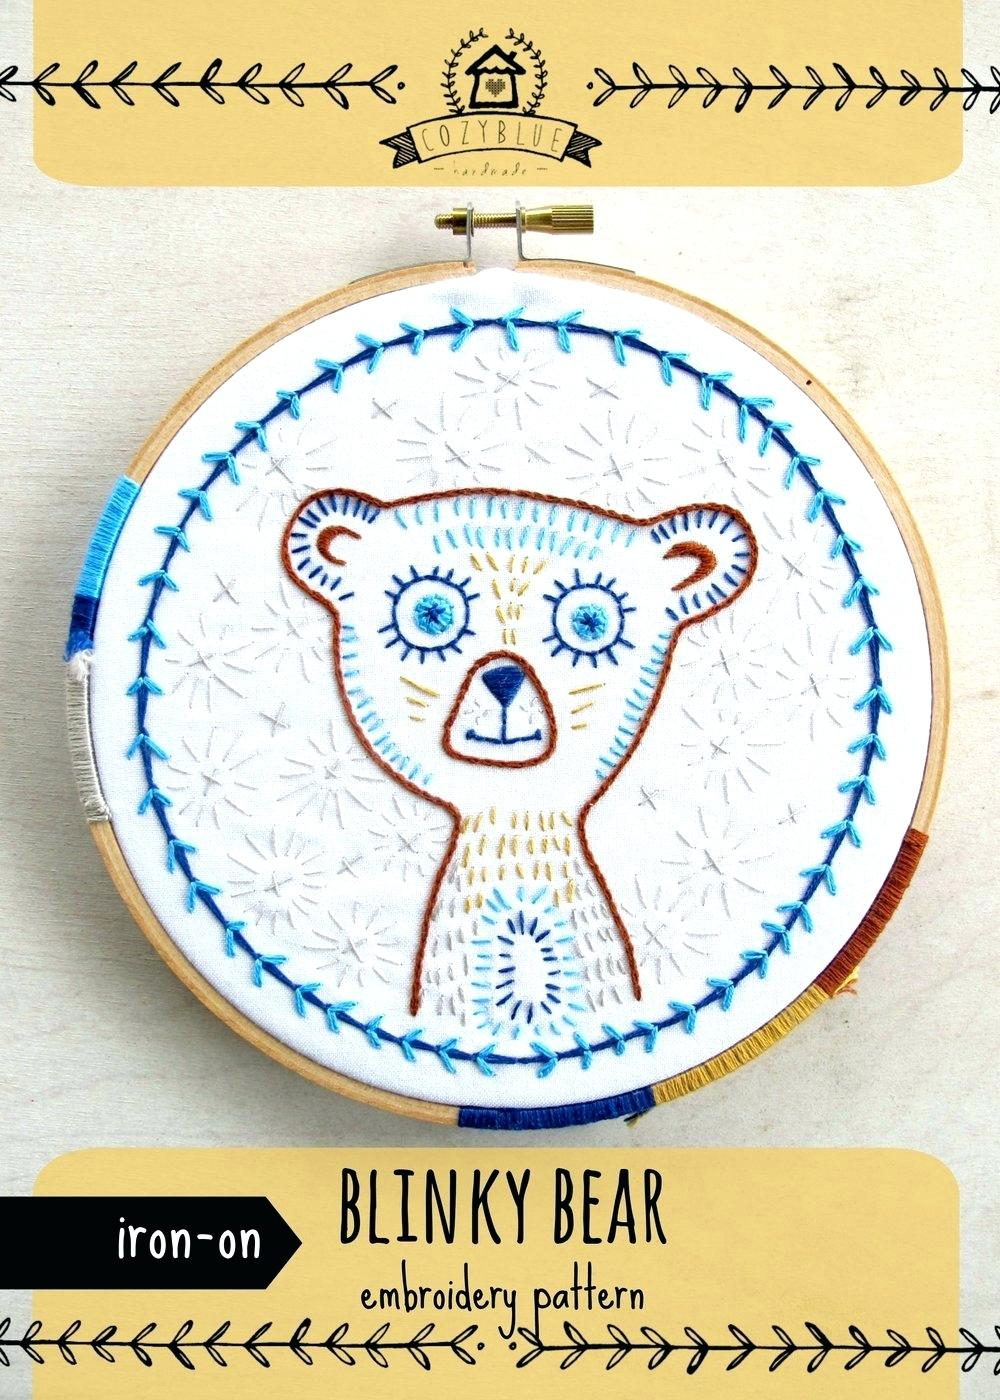 Embroidery Transfer Patterns Iron On Embroidery Transfers Bear Uk Hot Transfer Patterns Hand